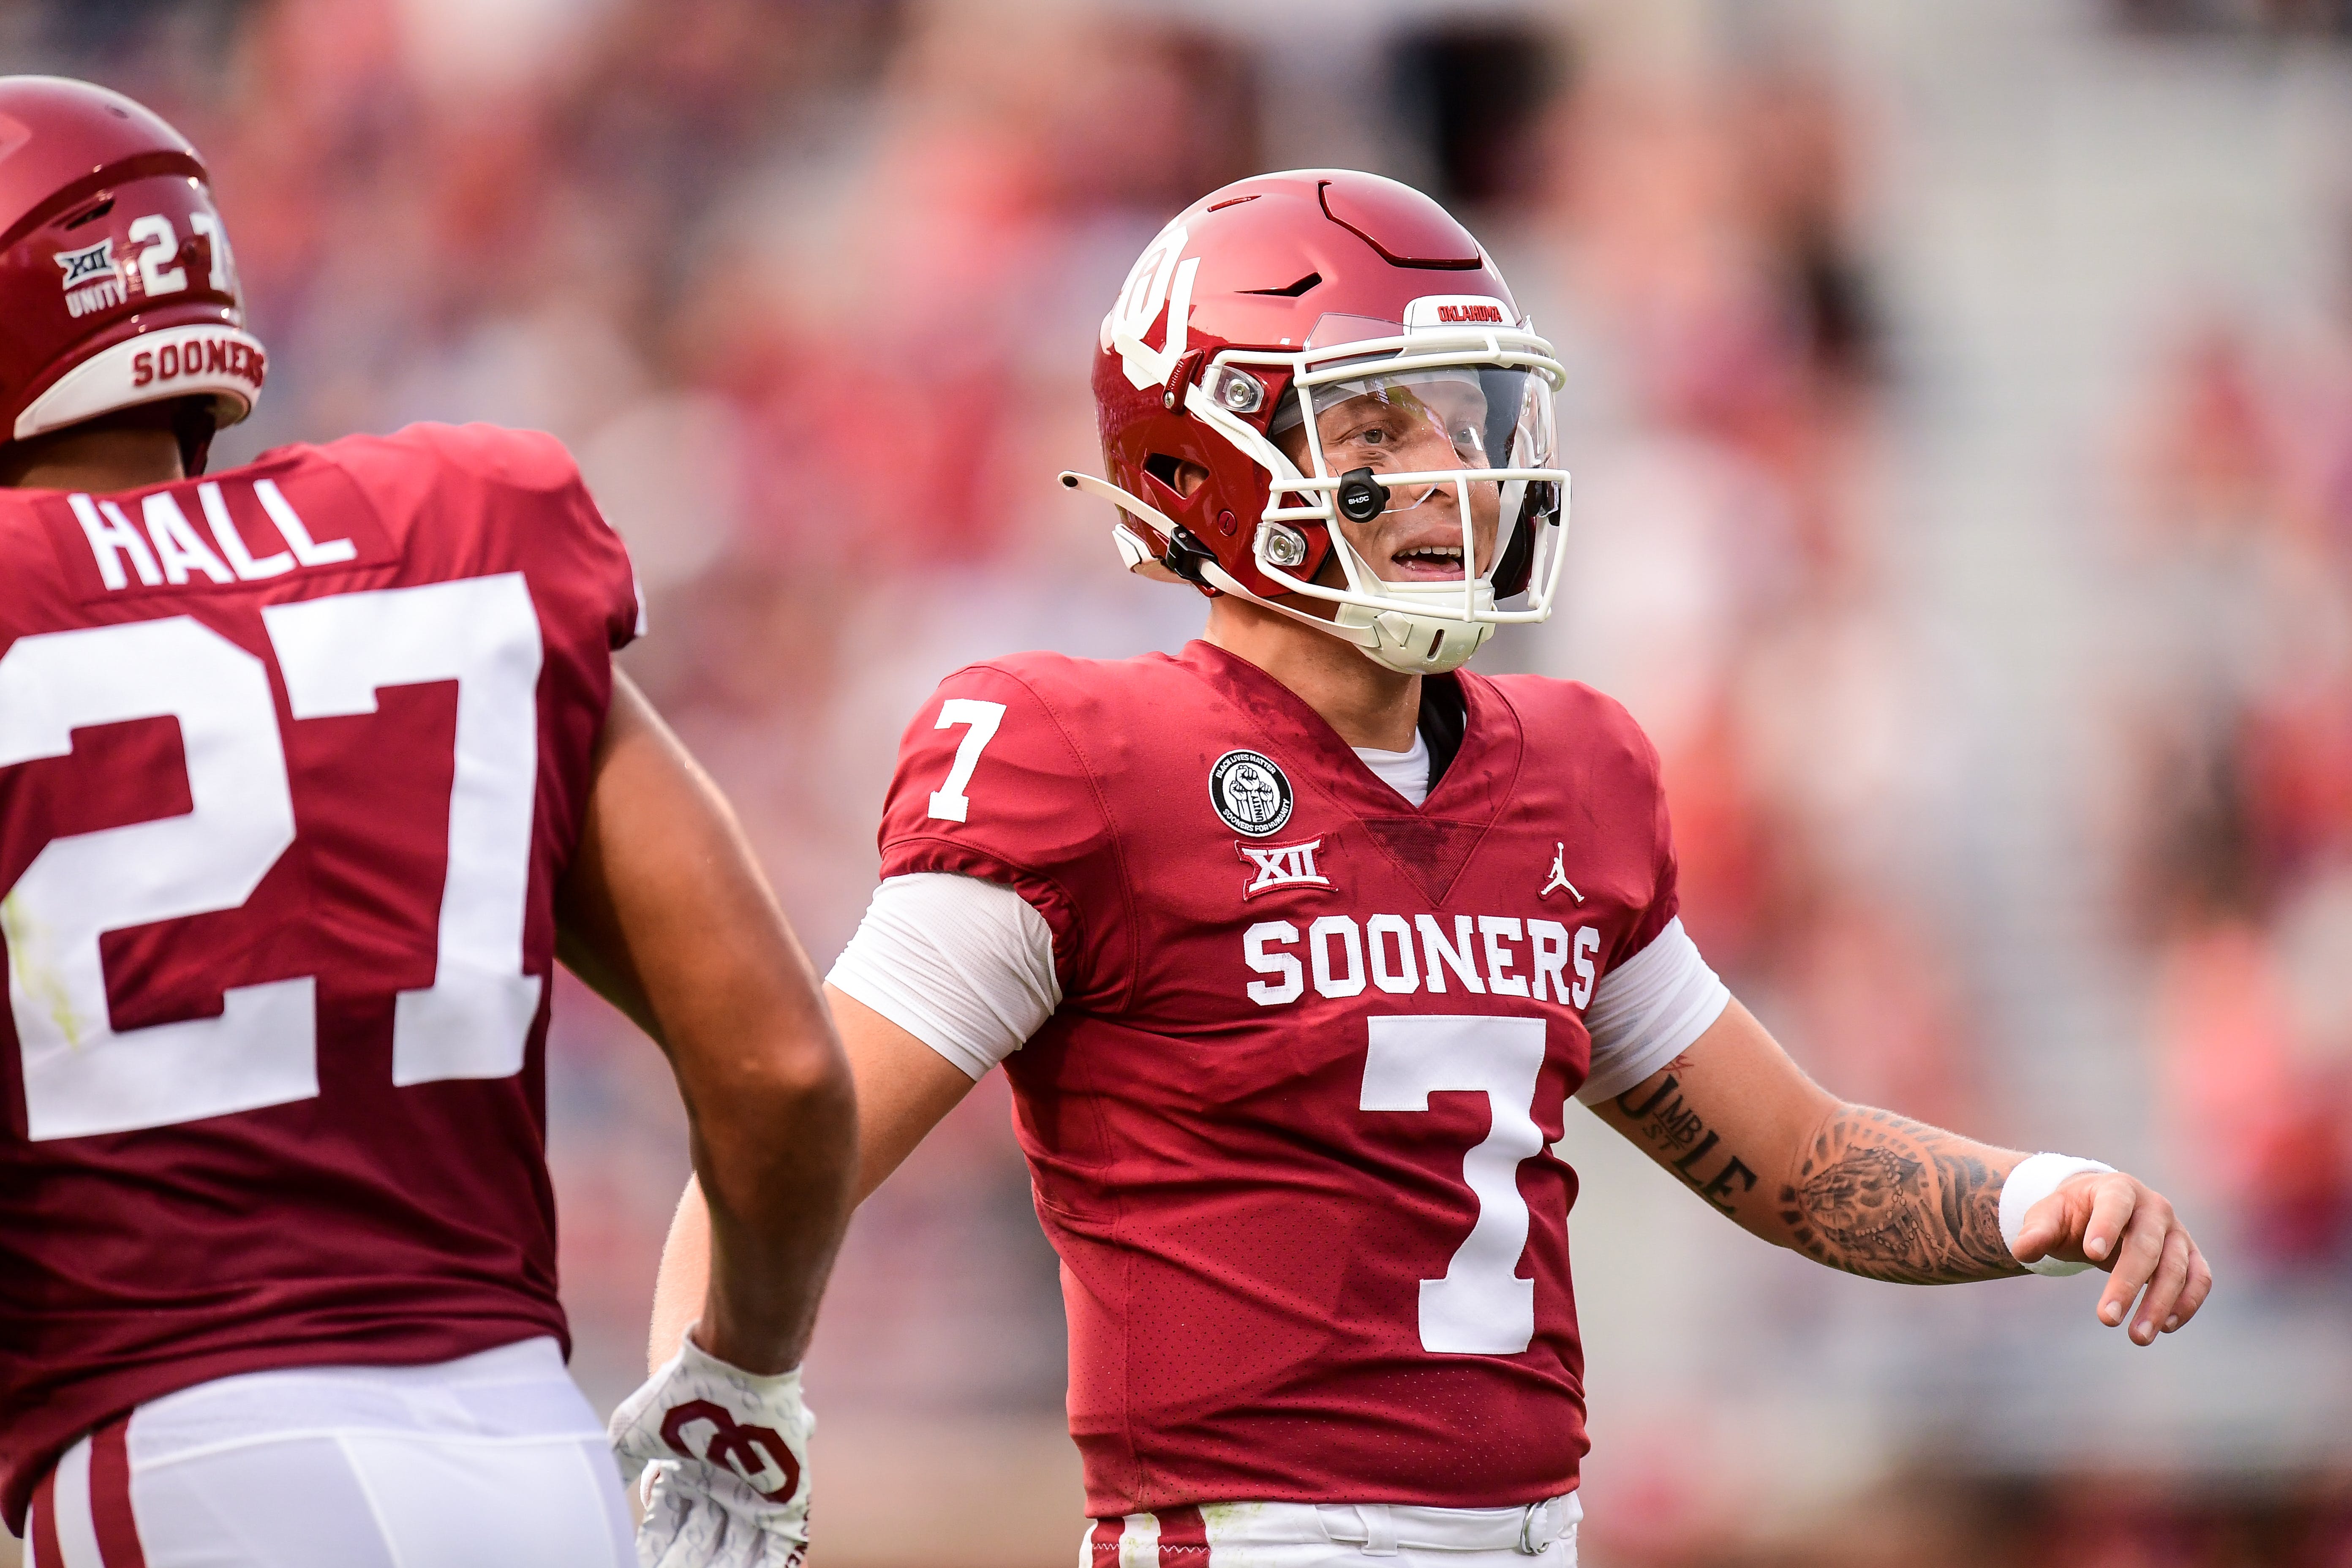 Oklahoma coach Lincoln Riley, Sooners players describe Spencer Rattler's arm strength Illustrated Oklahoma Sooners News, Analysis and More